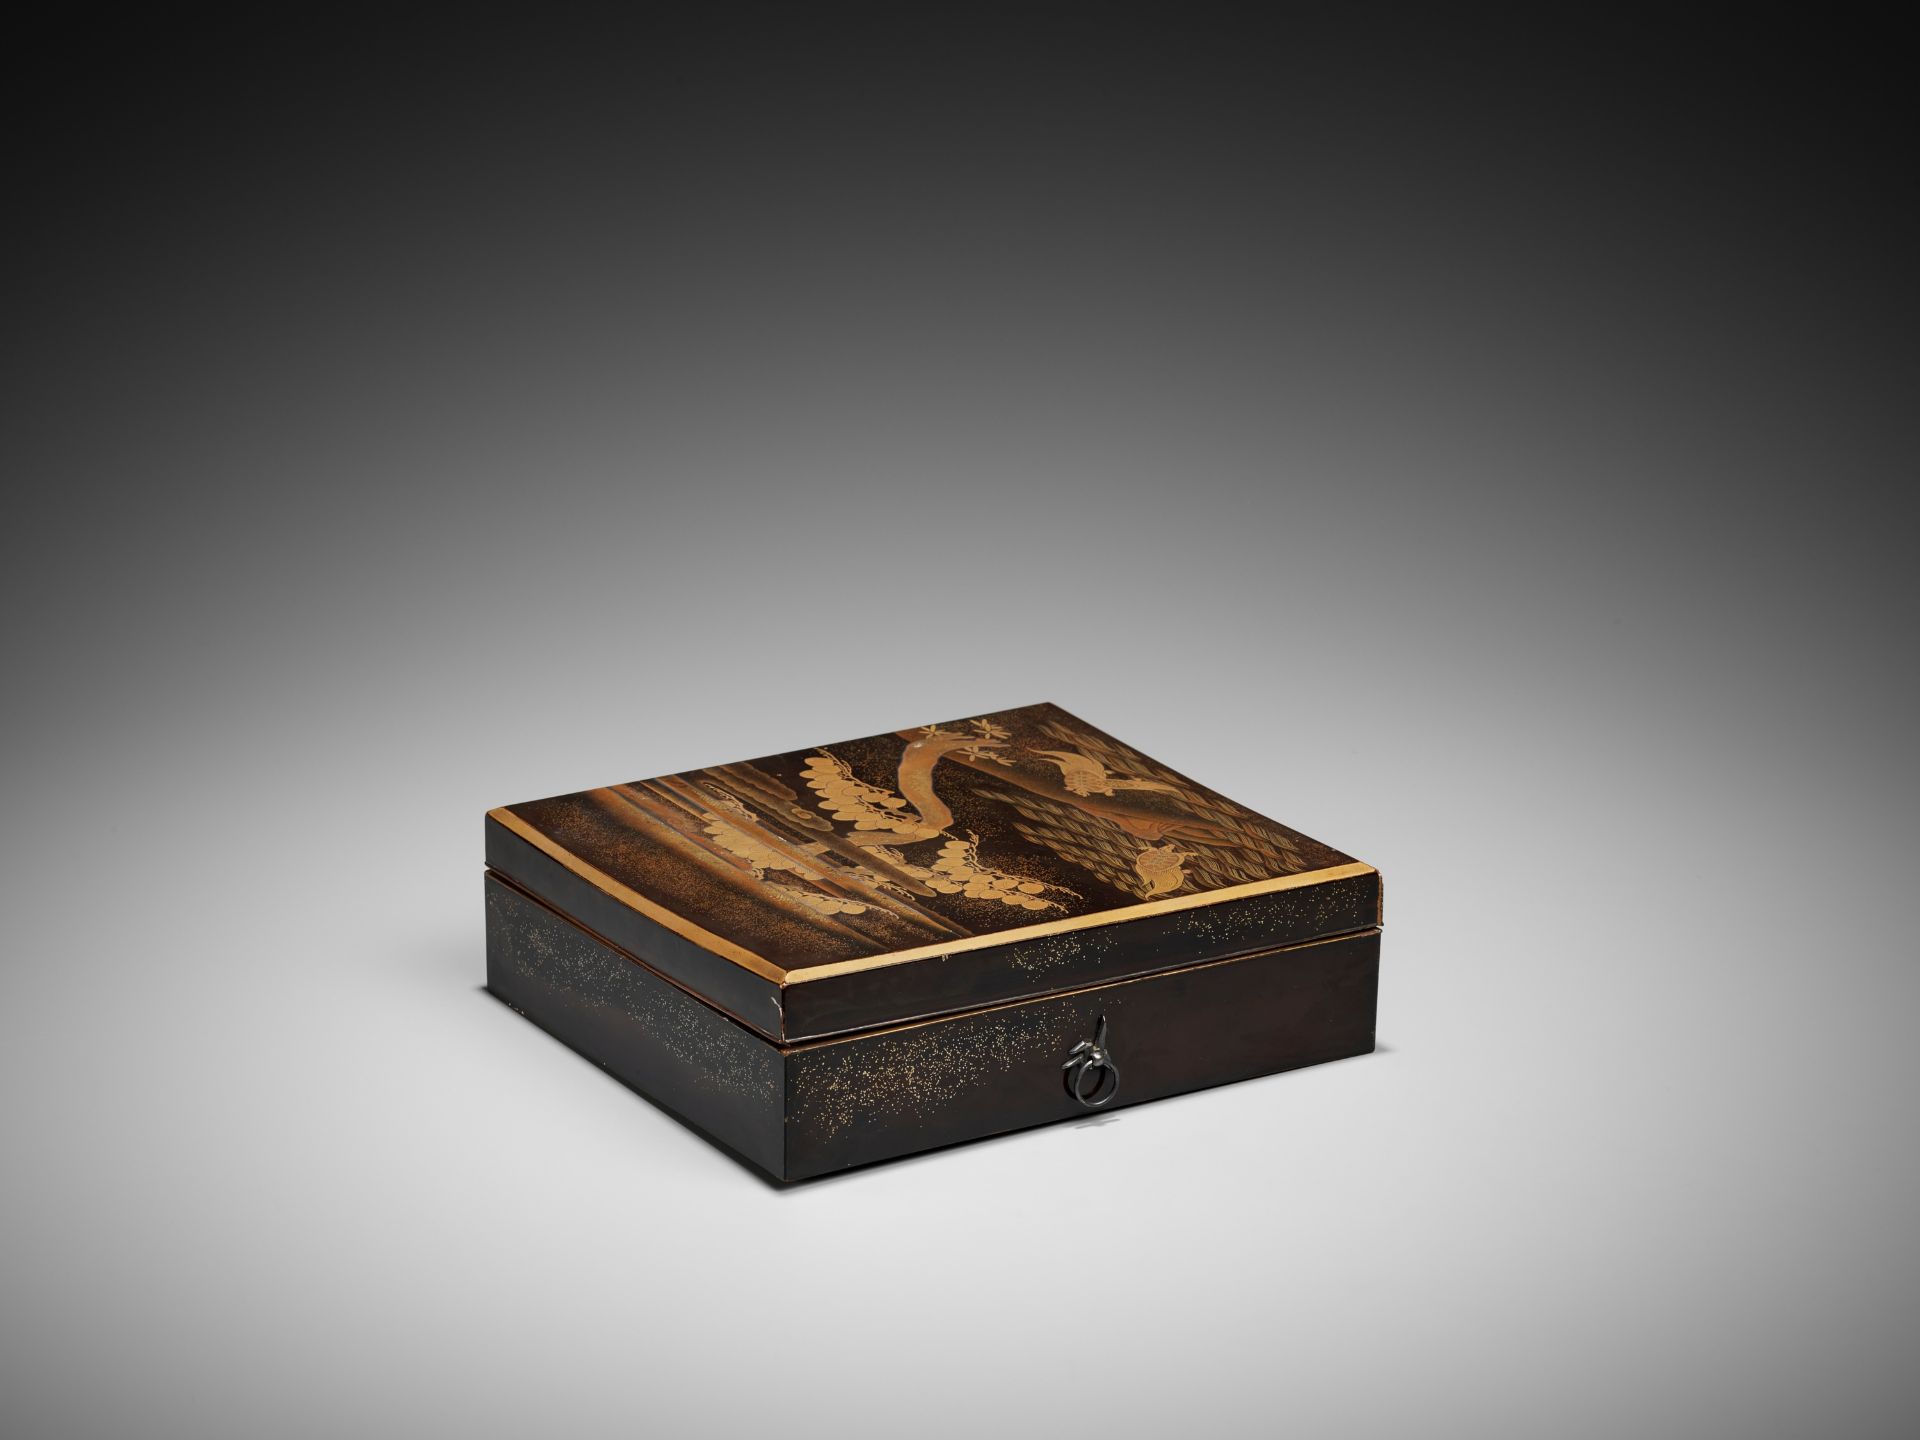 A LACQUER BOX AND COVER WITH MINOGAME DESIGN - Image 9 of 10